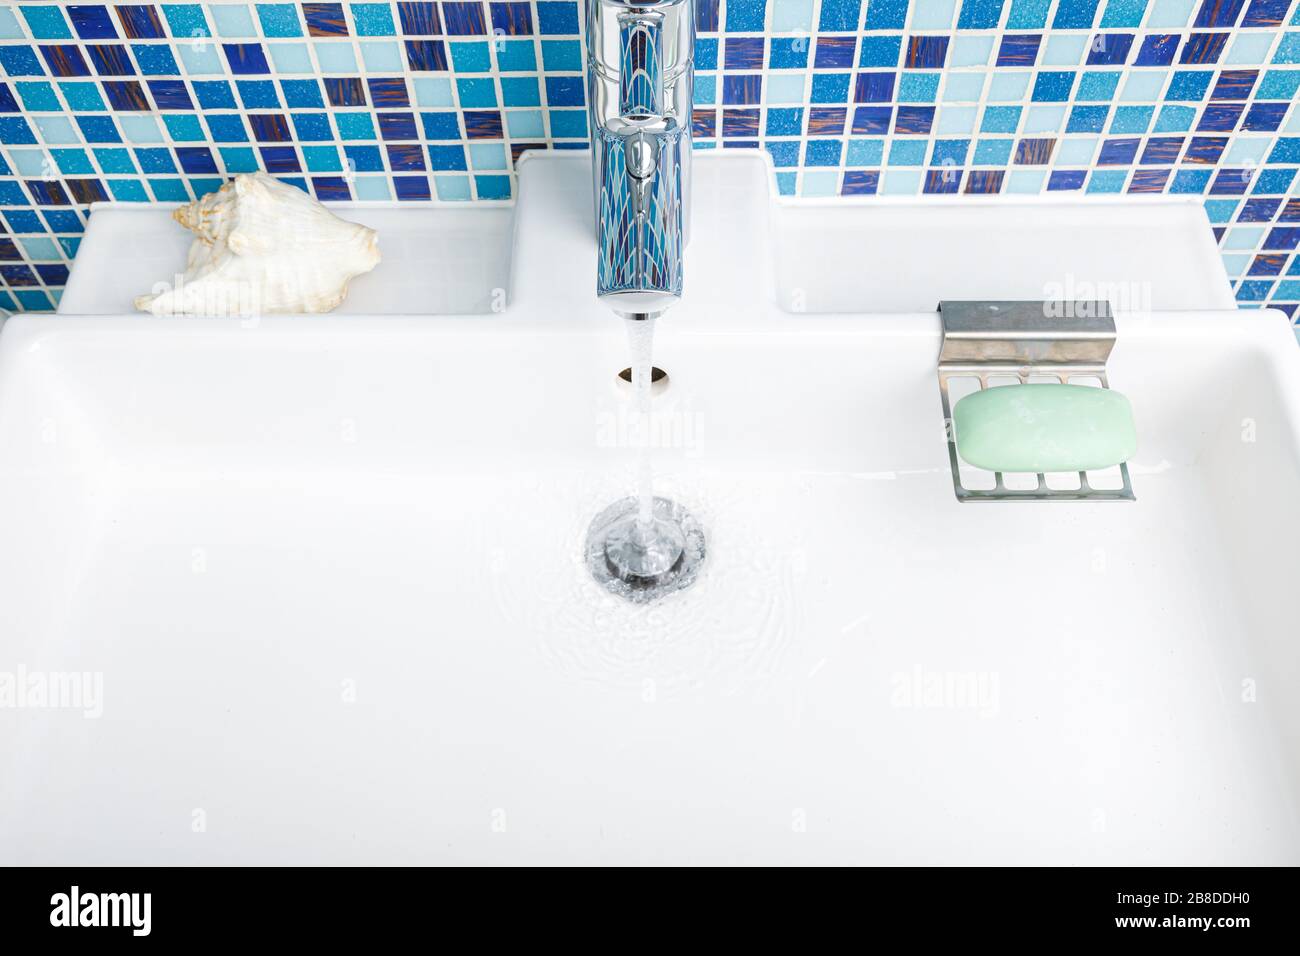 Bathroom sink tap with running water - wasting water concept Stock Photo